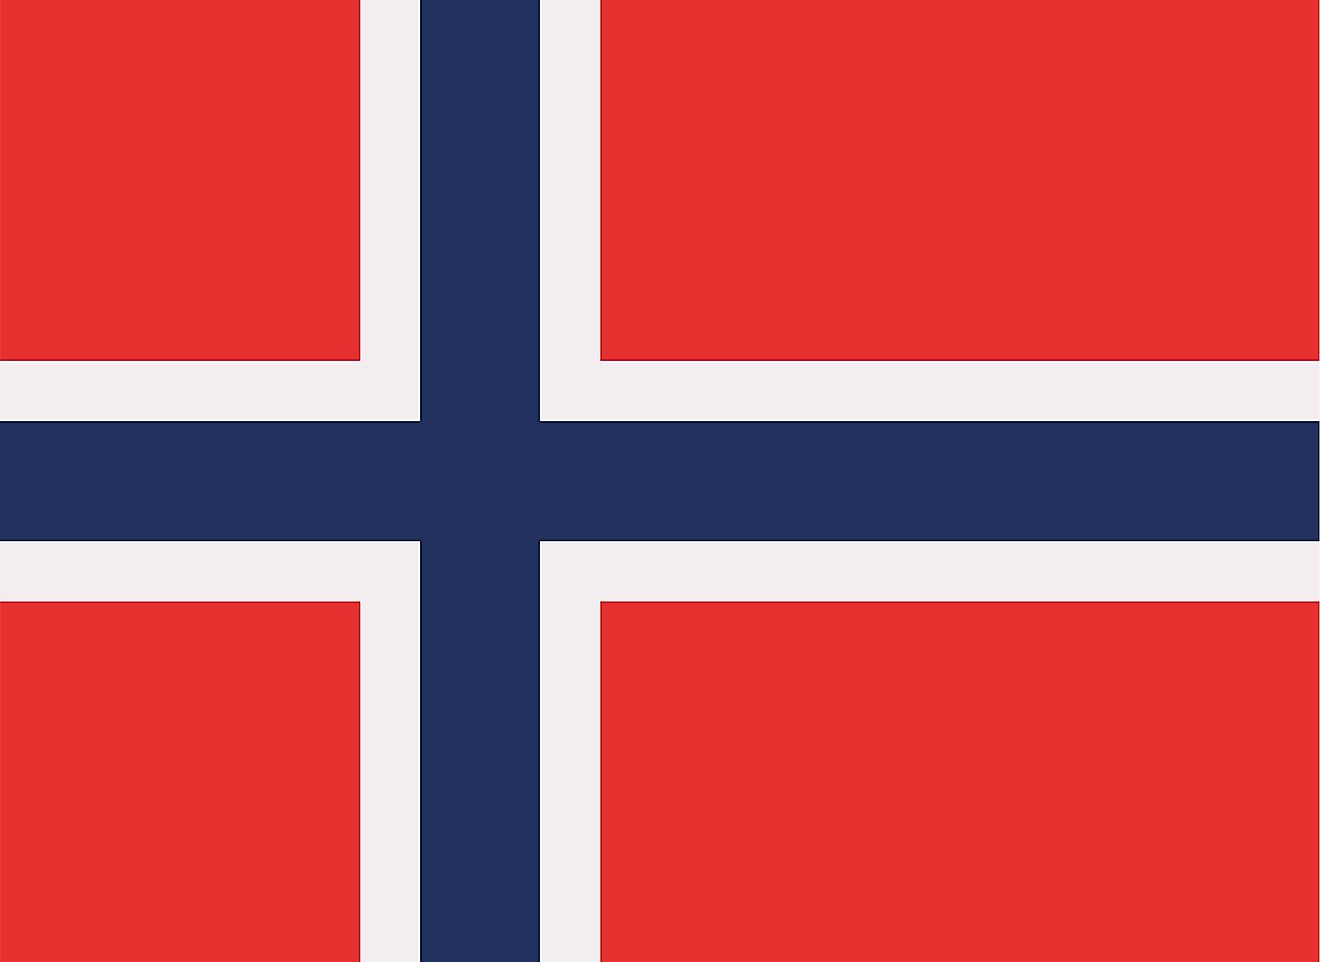 The flag of Norway is made of a red background and has a blue cross superimposed on a white cross so that the white cross outlines the blue color (the Scandinavian cross)